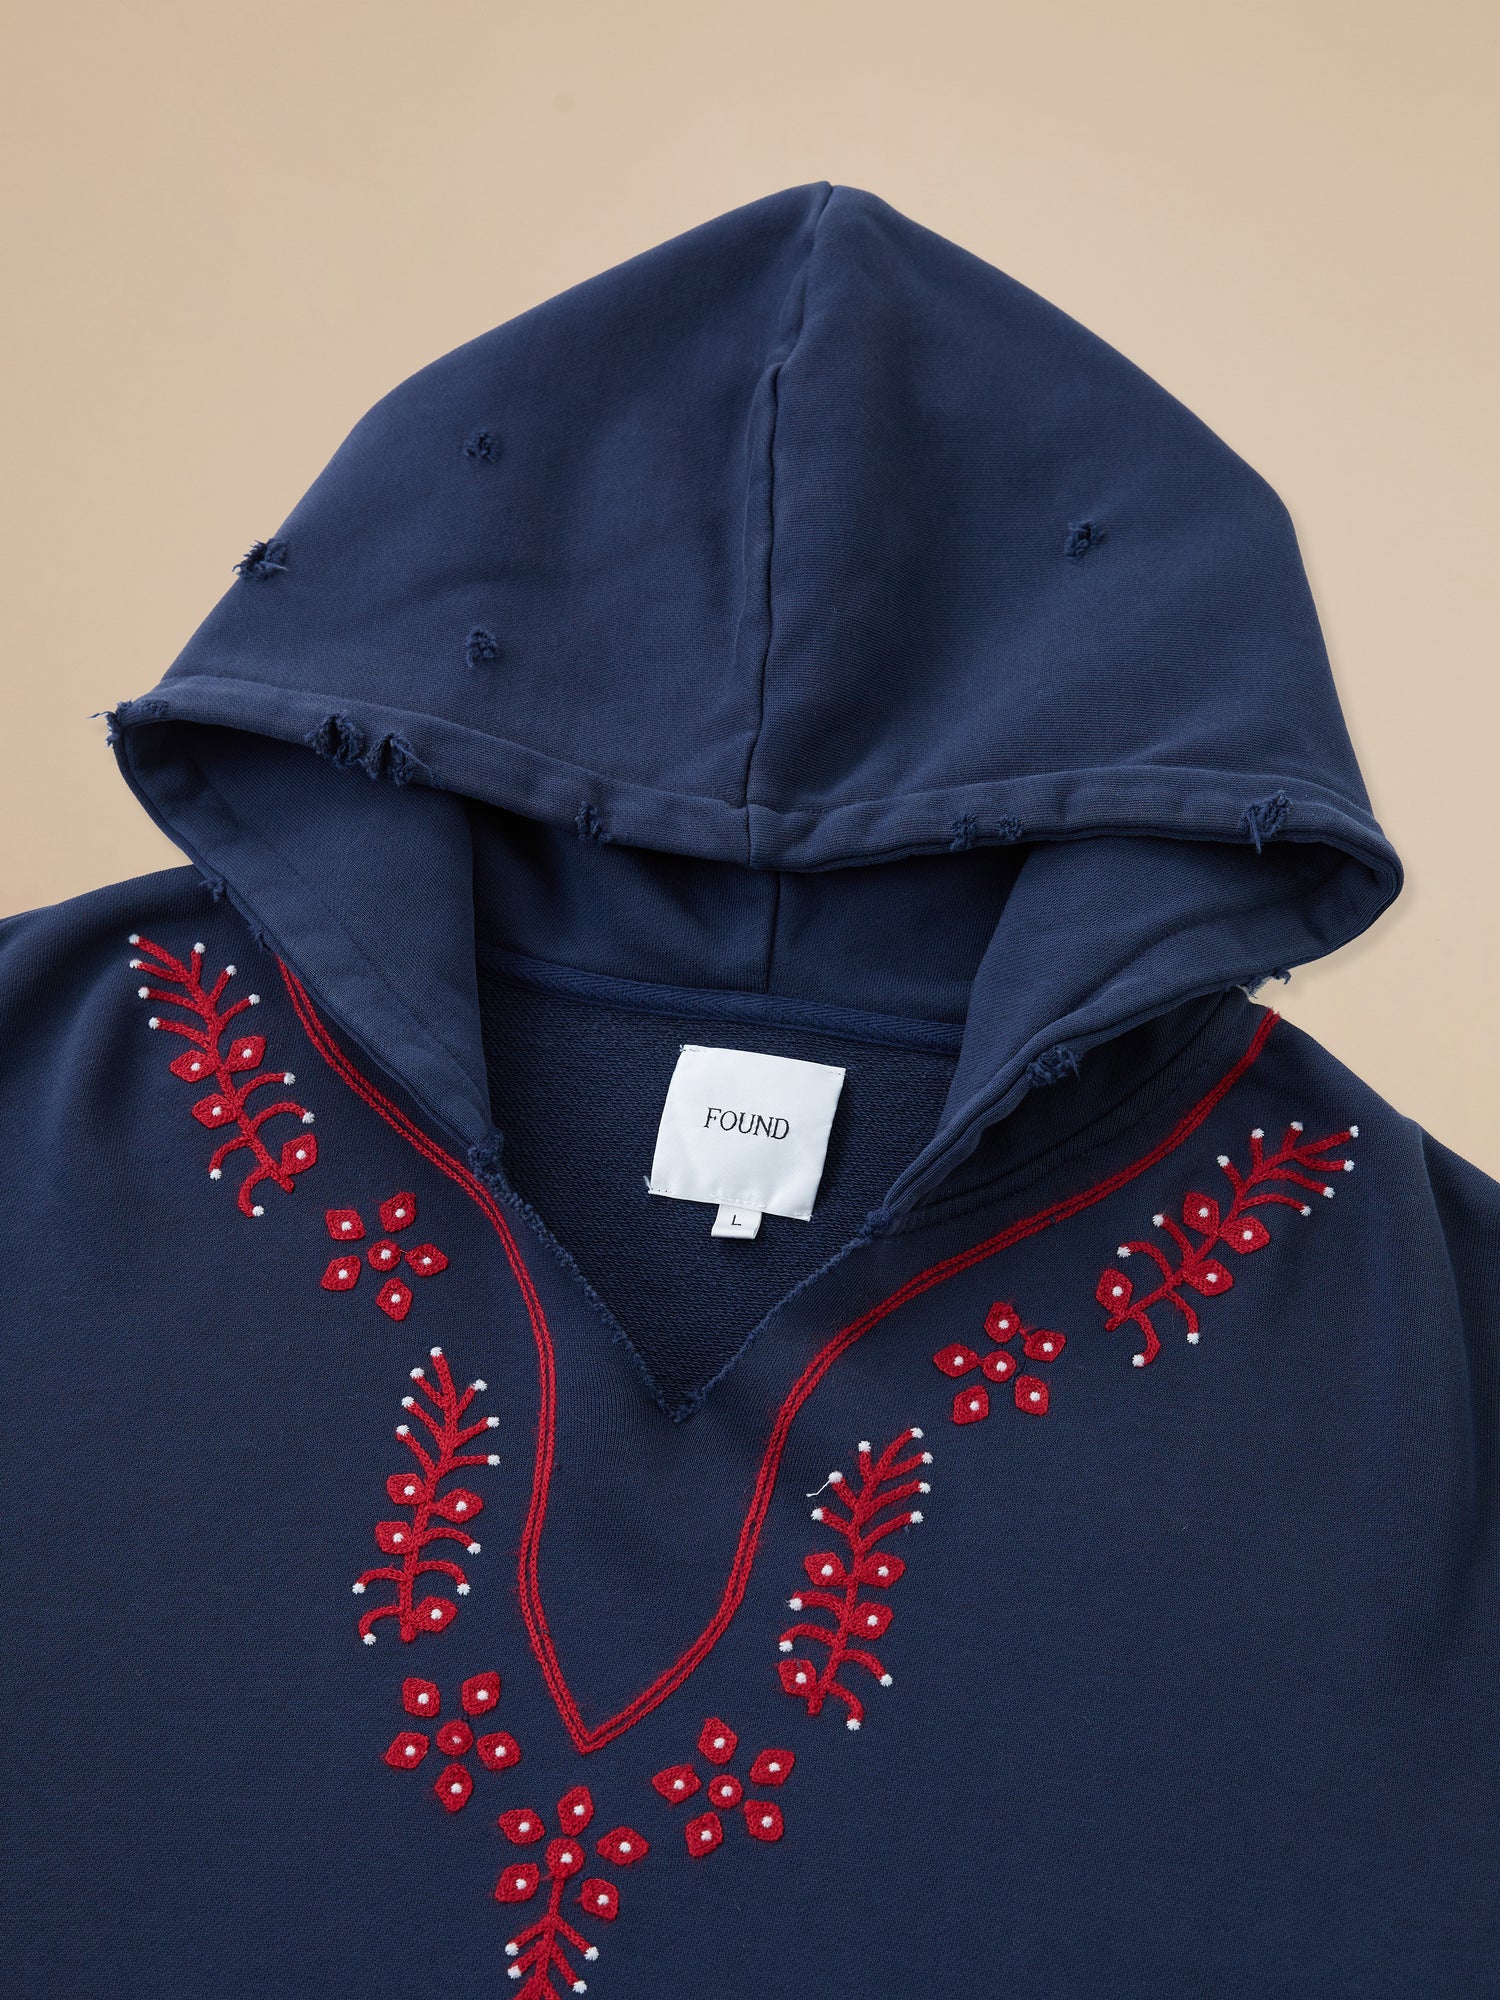 A Found Indus Embroidered Hoodie with red embroidery.